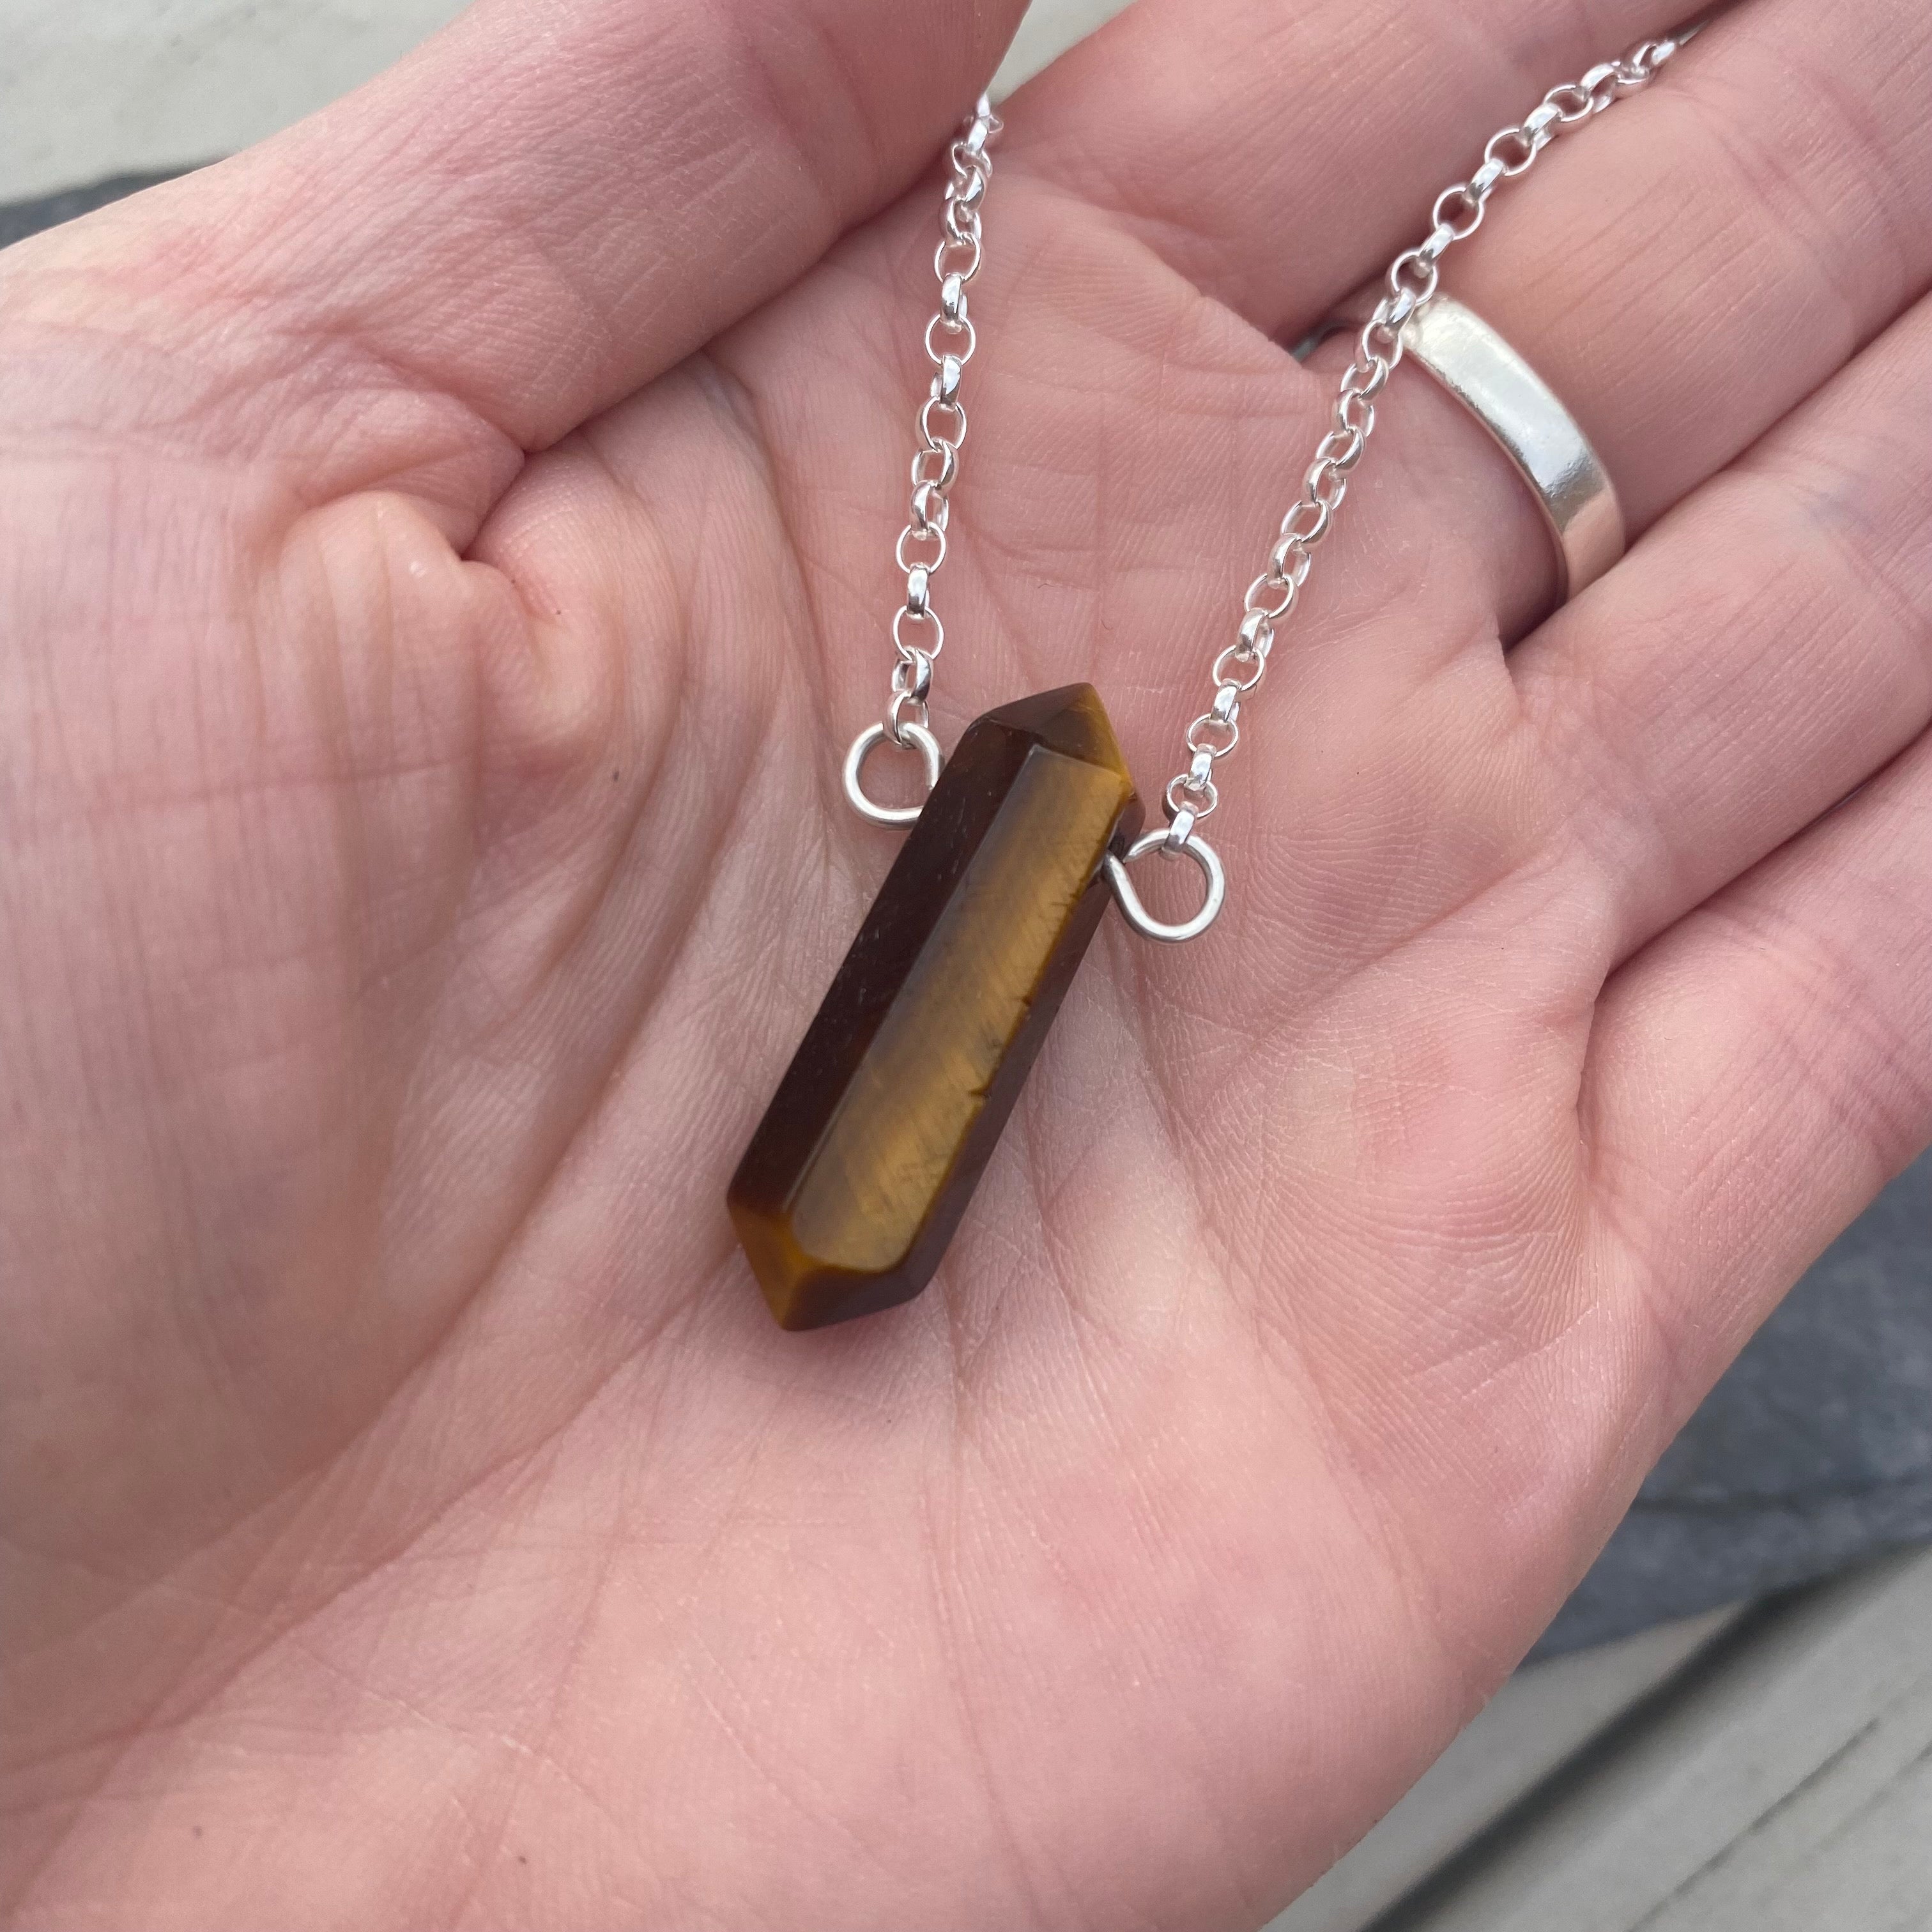 Tigers Eye Necklace - Sterling Silver Belcher Chain - Natural Crystal Jewellery